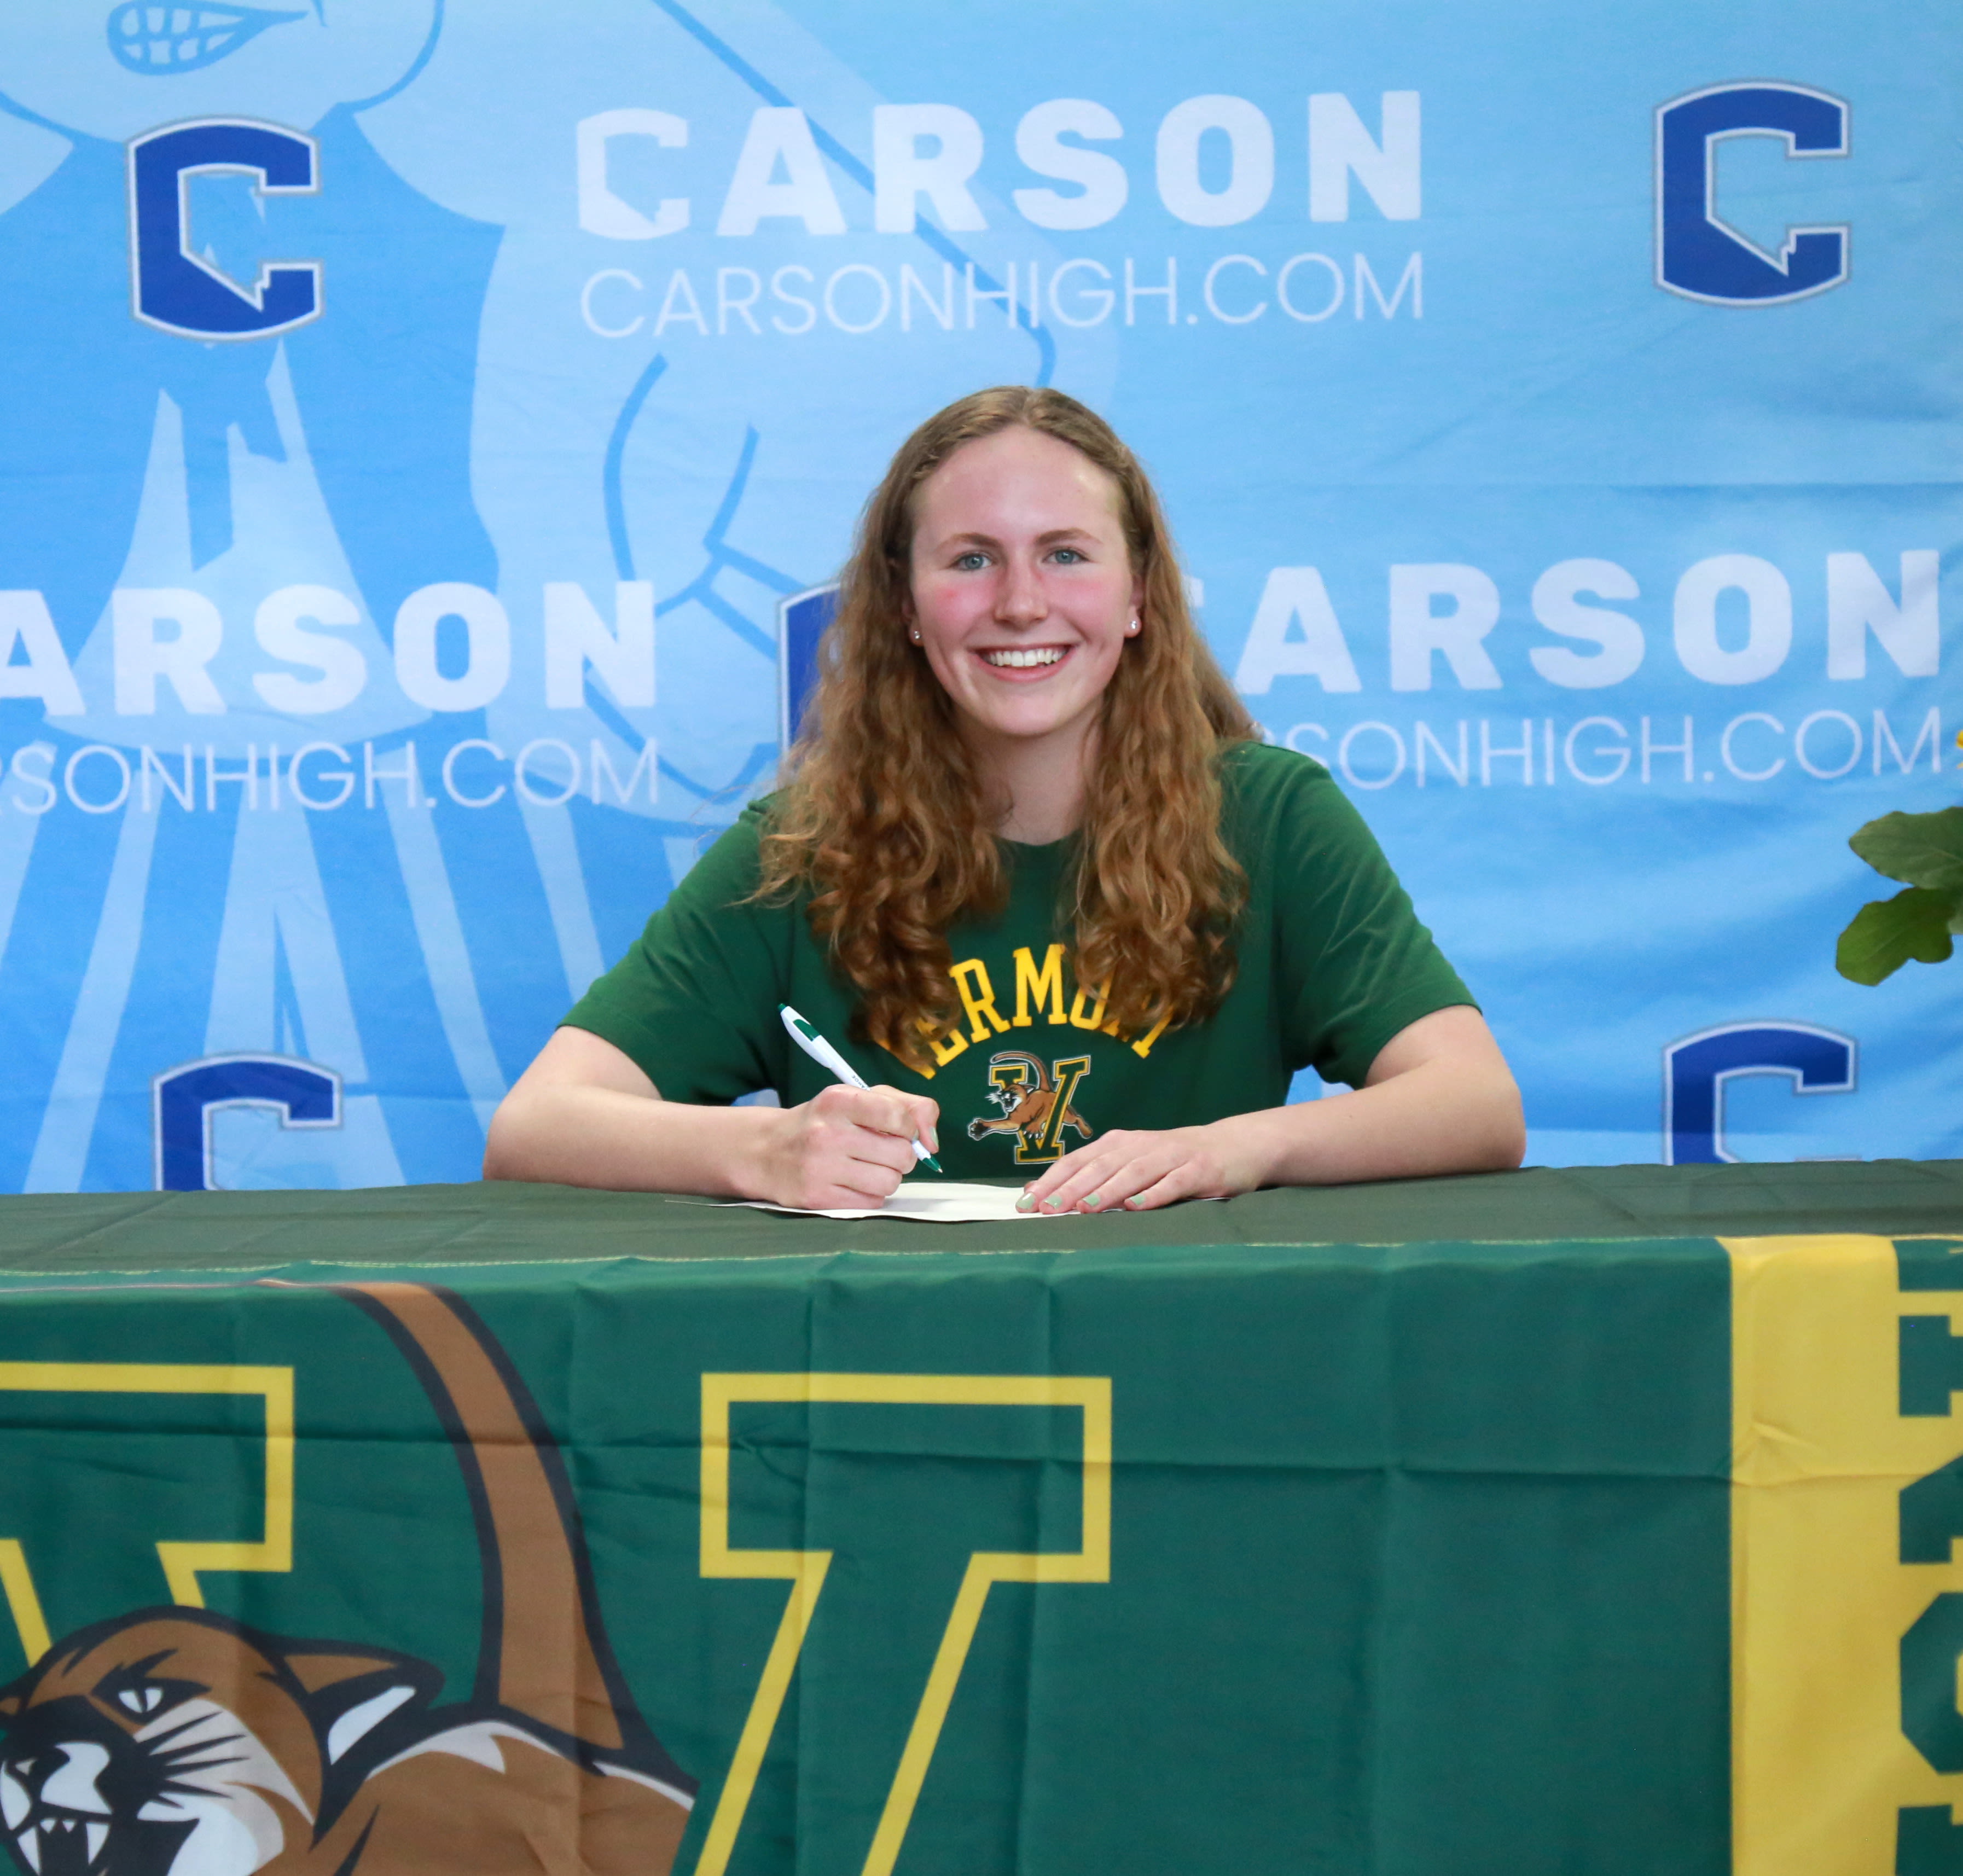 Russell heads to University of Vermont